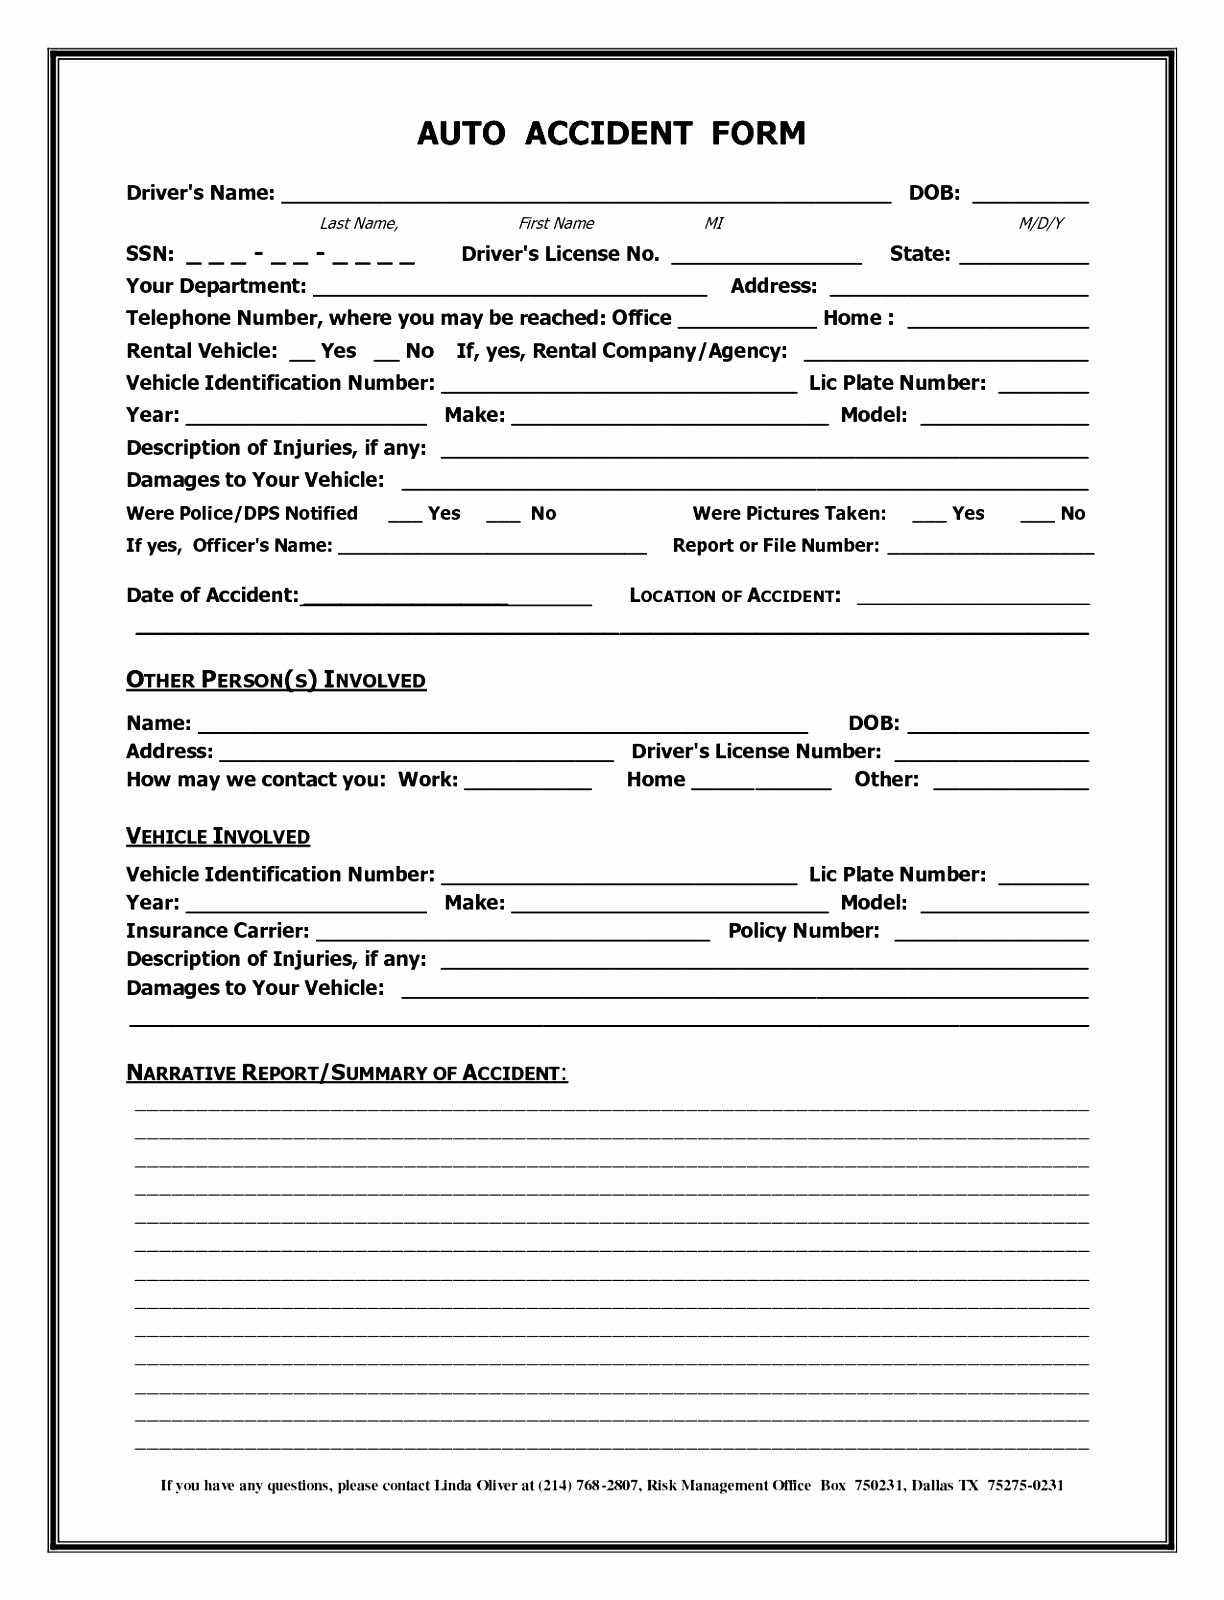 Accident Report Form Template Uk Of Motor Vehicle Choice Image throughout Vehicle Accident Report Template